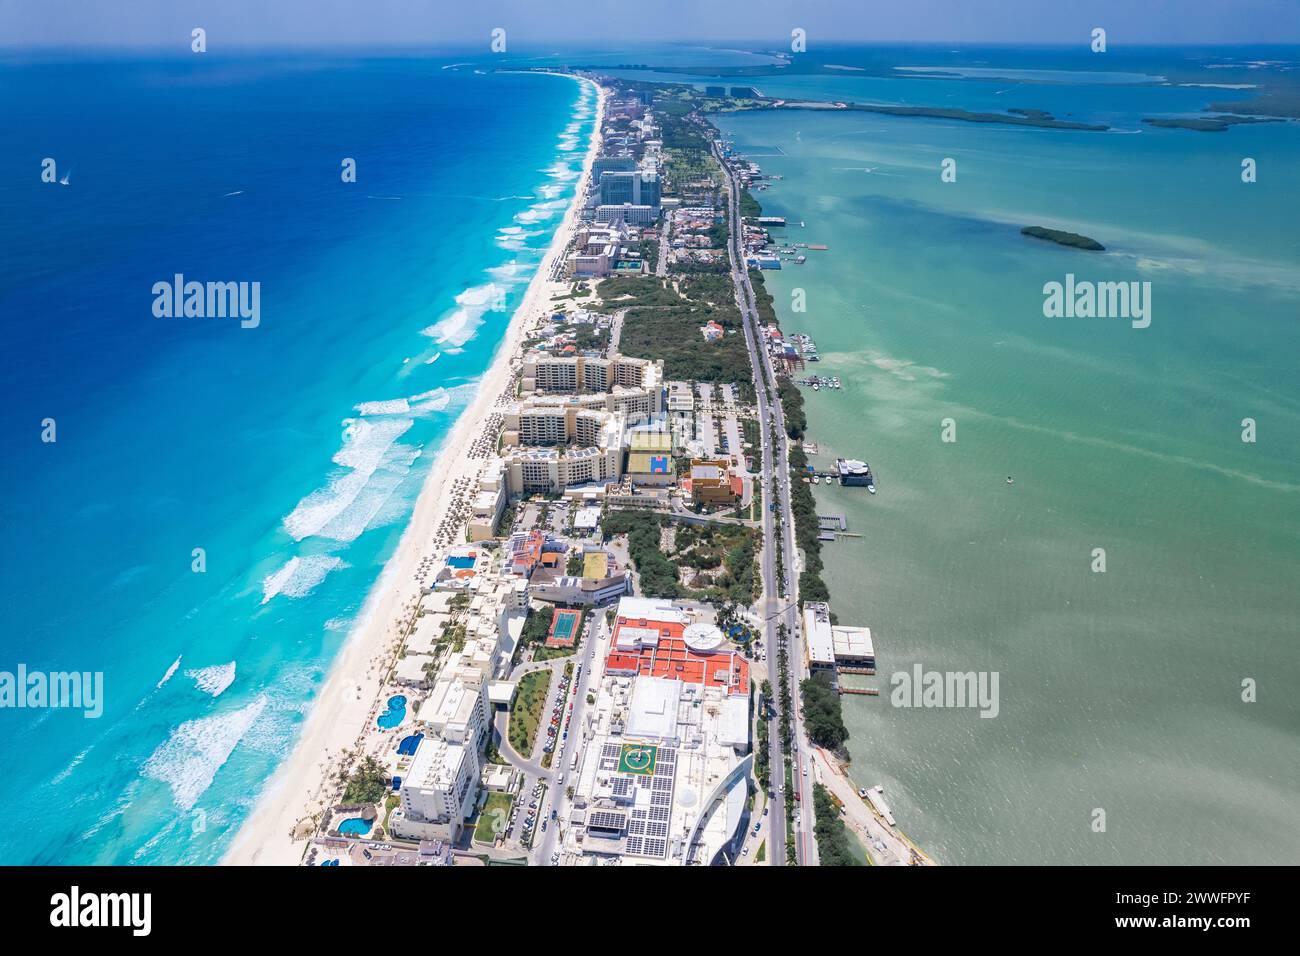 Drone view of Cancun Hotel Zone, Mexico Stock Photo